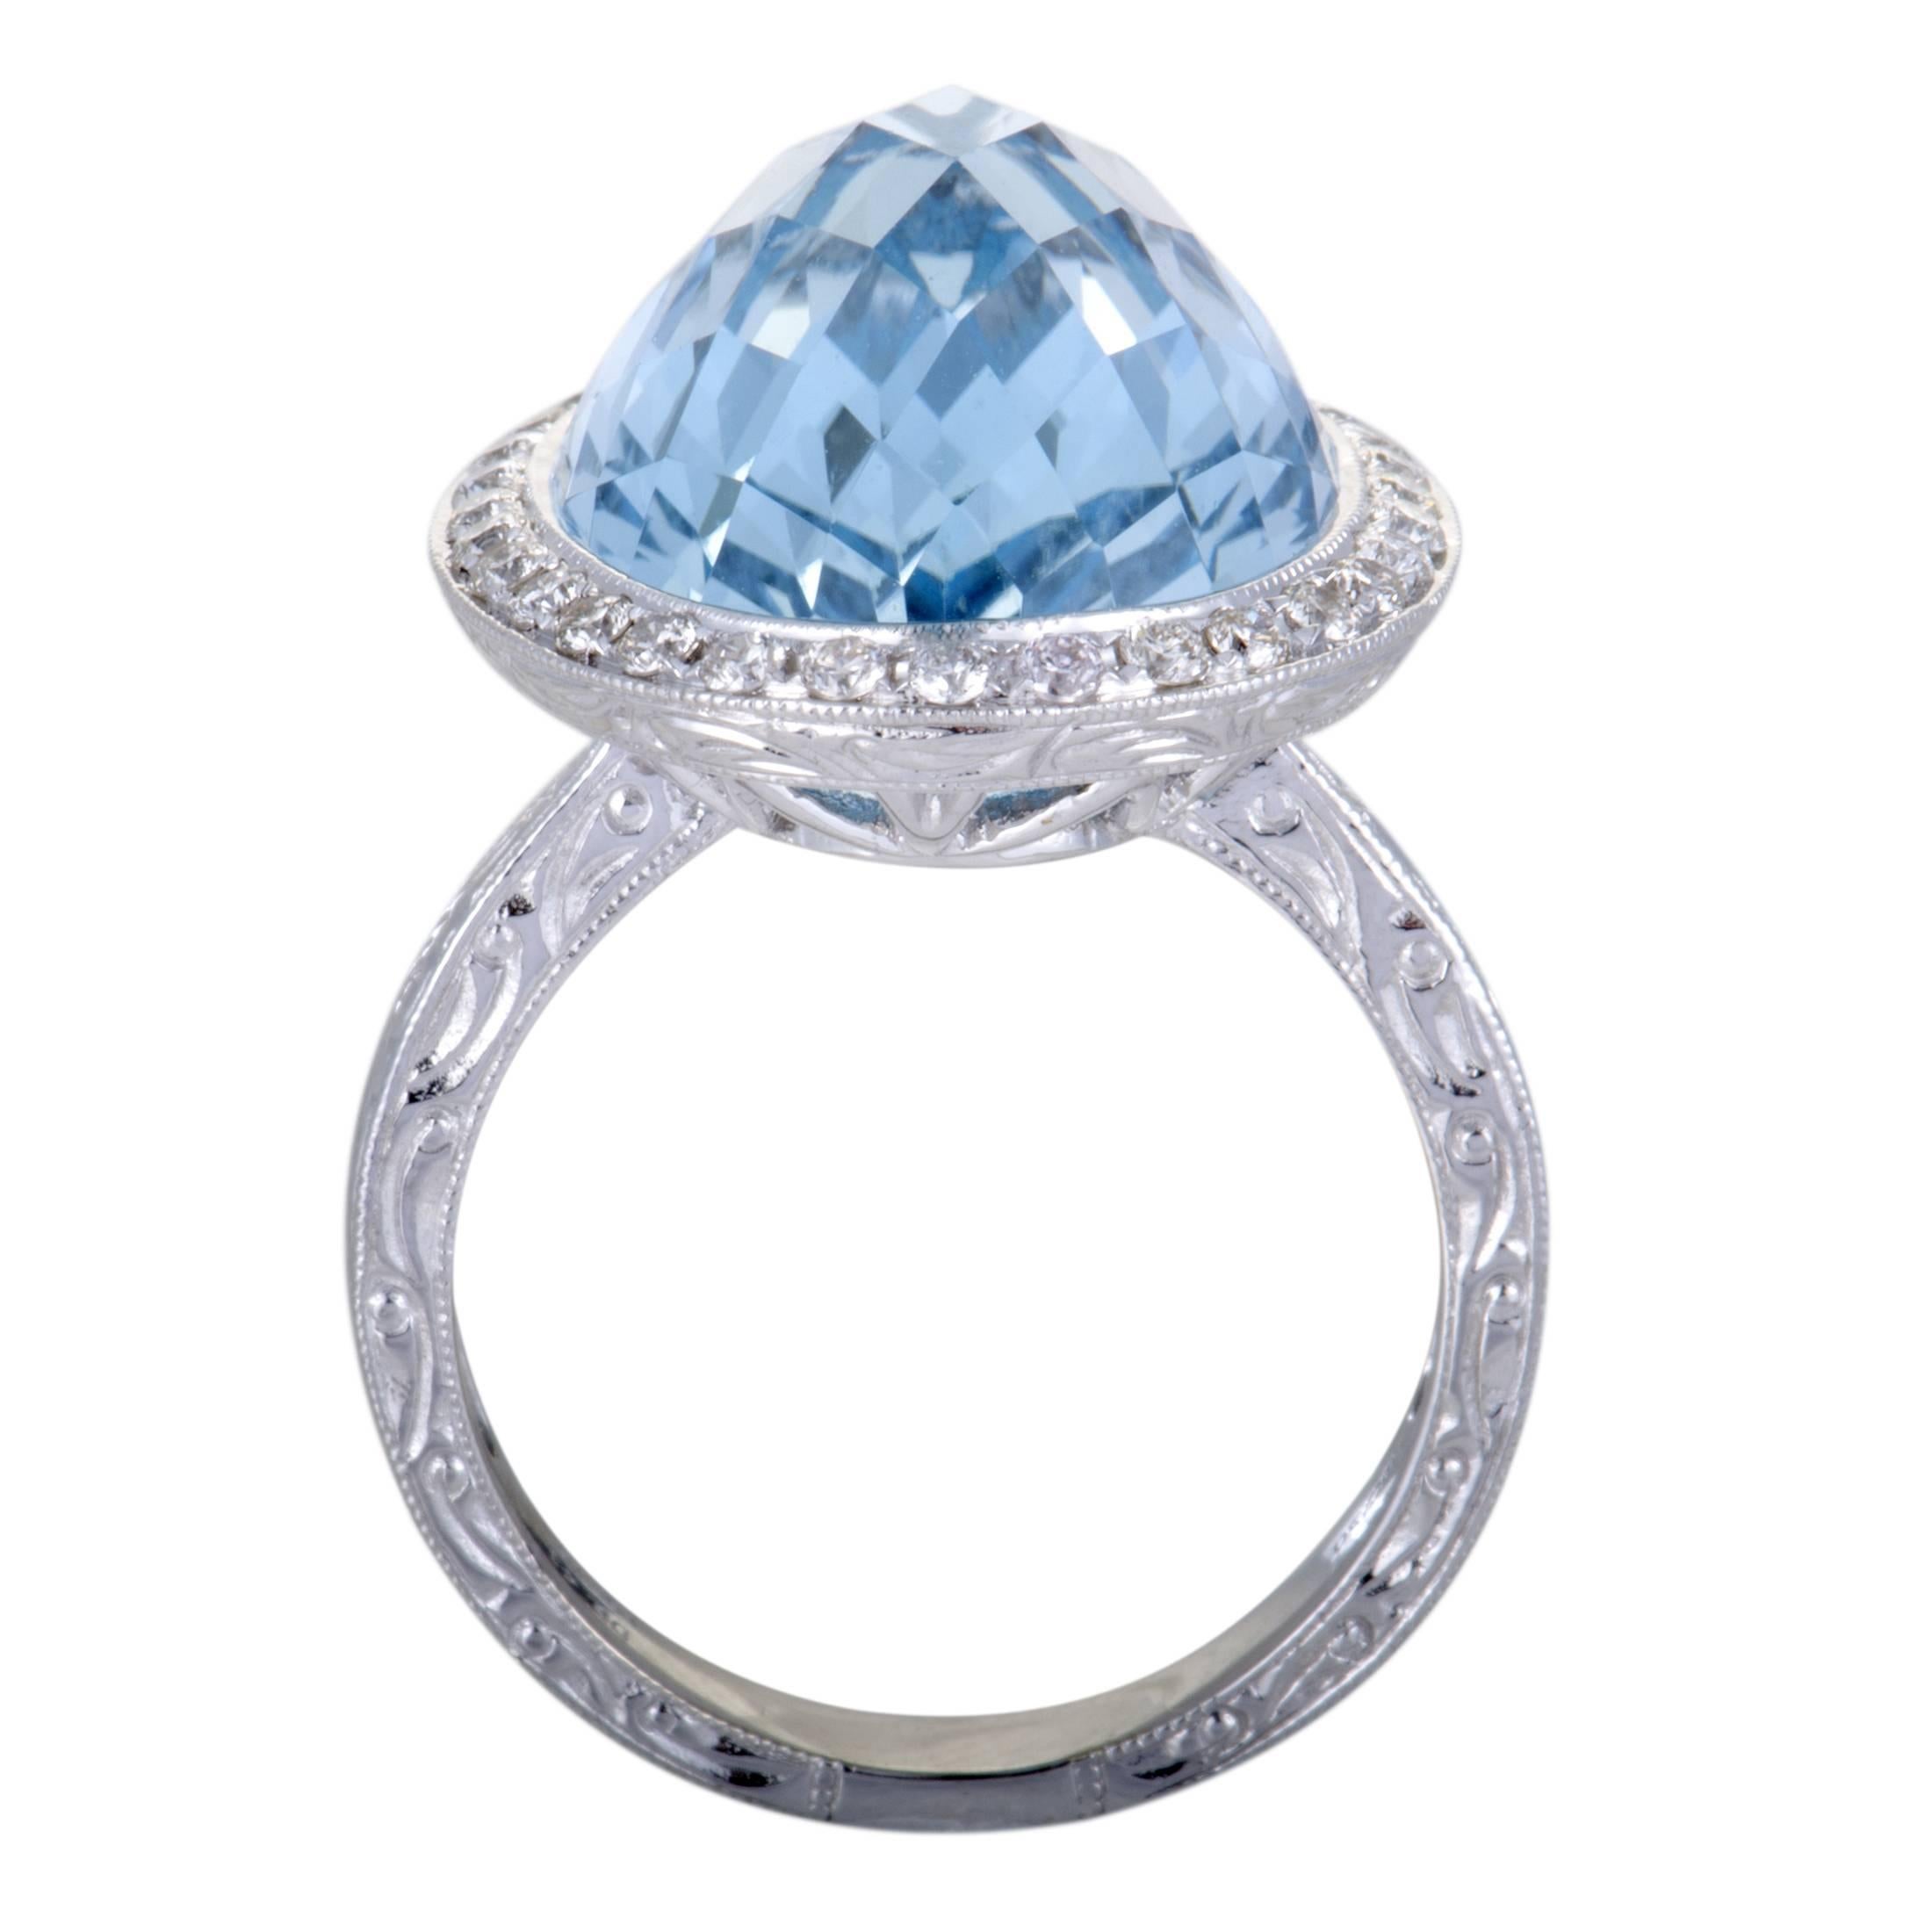 The alluring aquamarine nuance is gorgeously complemented by the bright gleam of 18K white gold and the scintillating resplendence of diamond stones in this fascinating cocktail ring. The aquamarine weighs 18.18 carats and the diamonds total 0.41